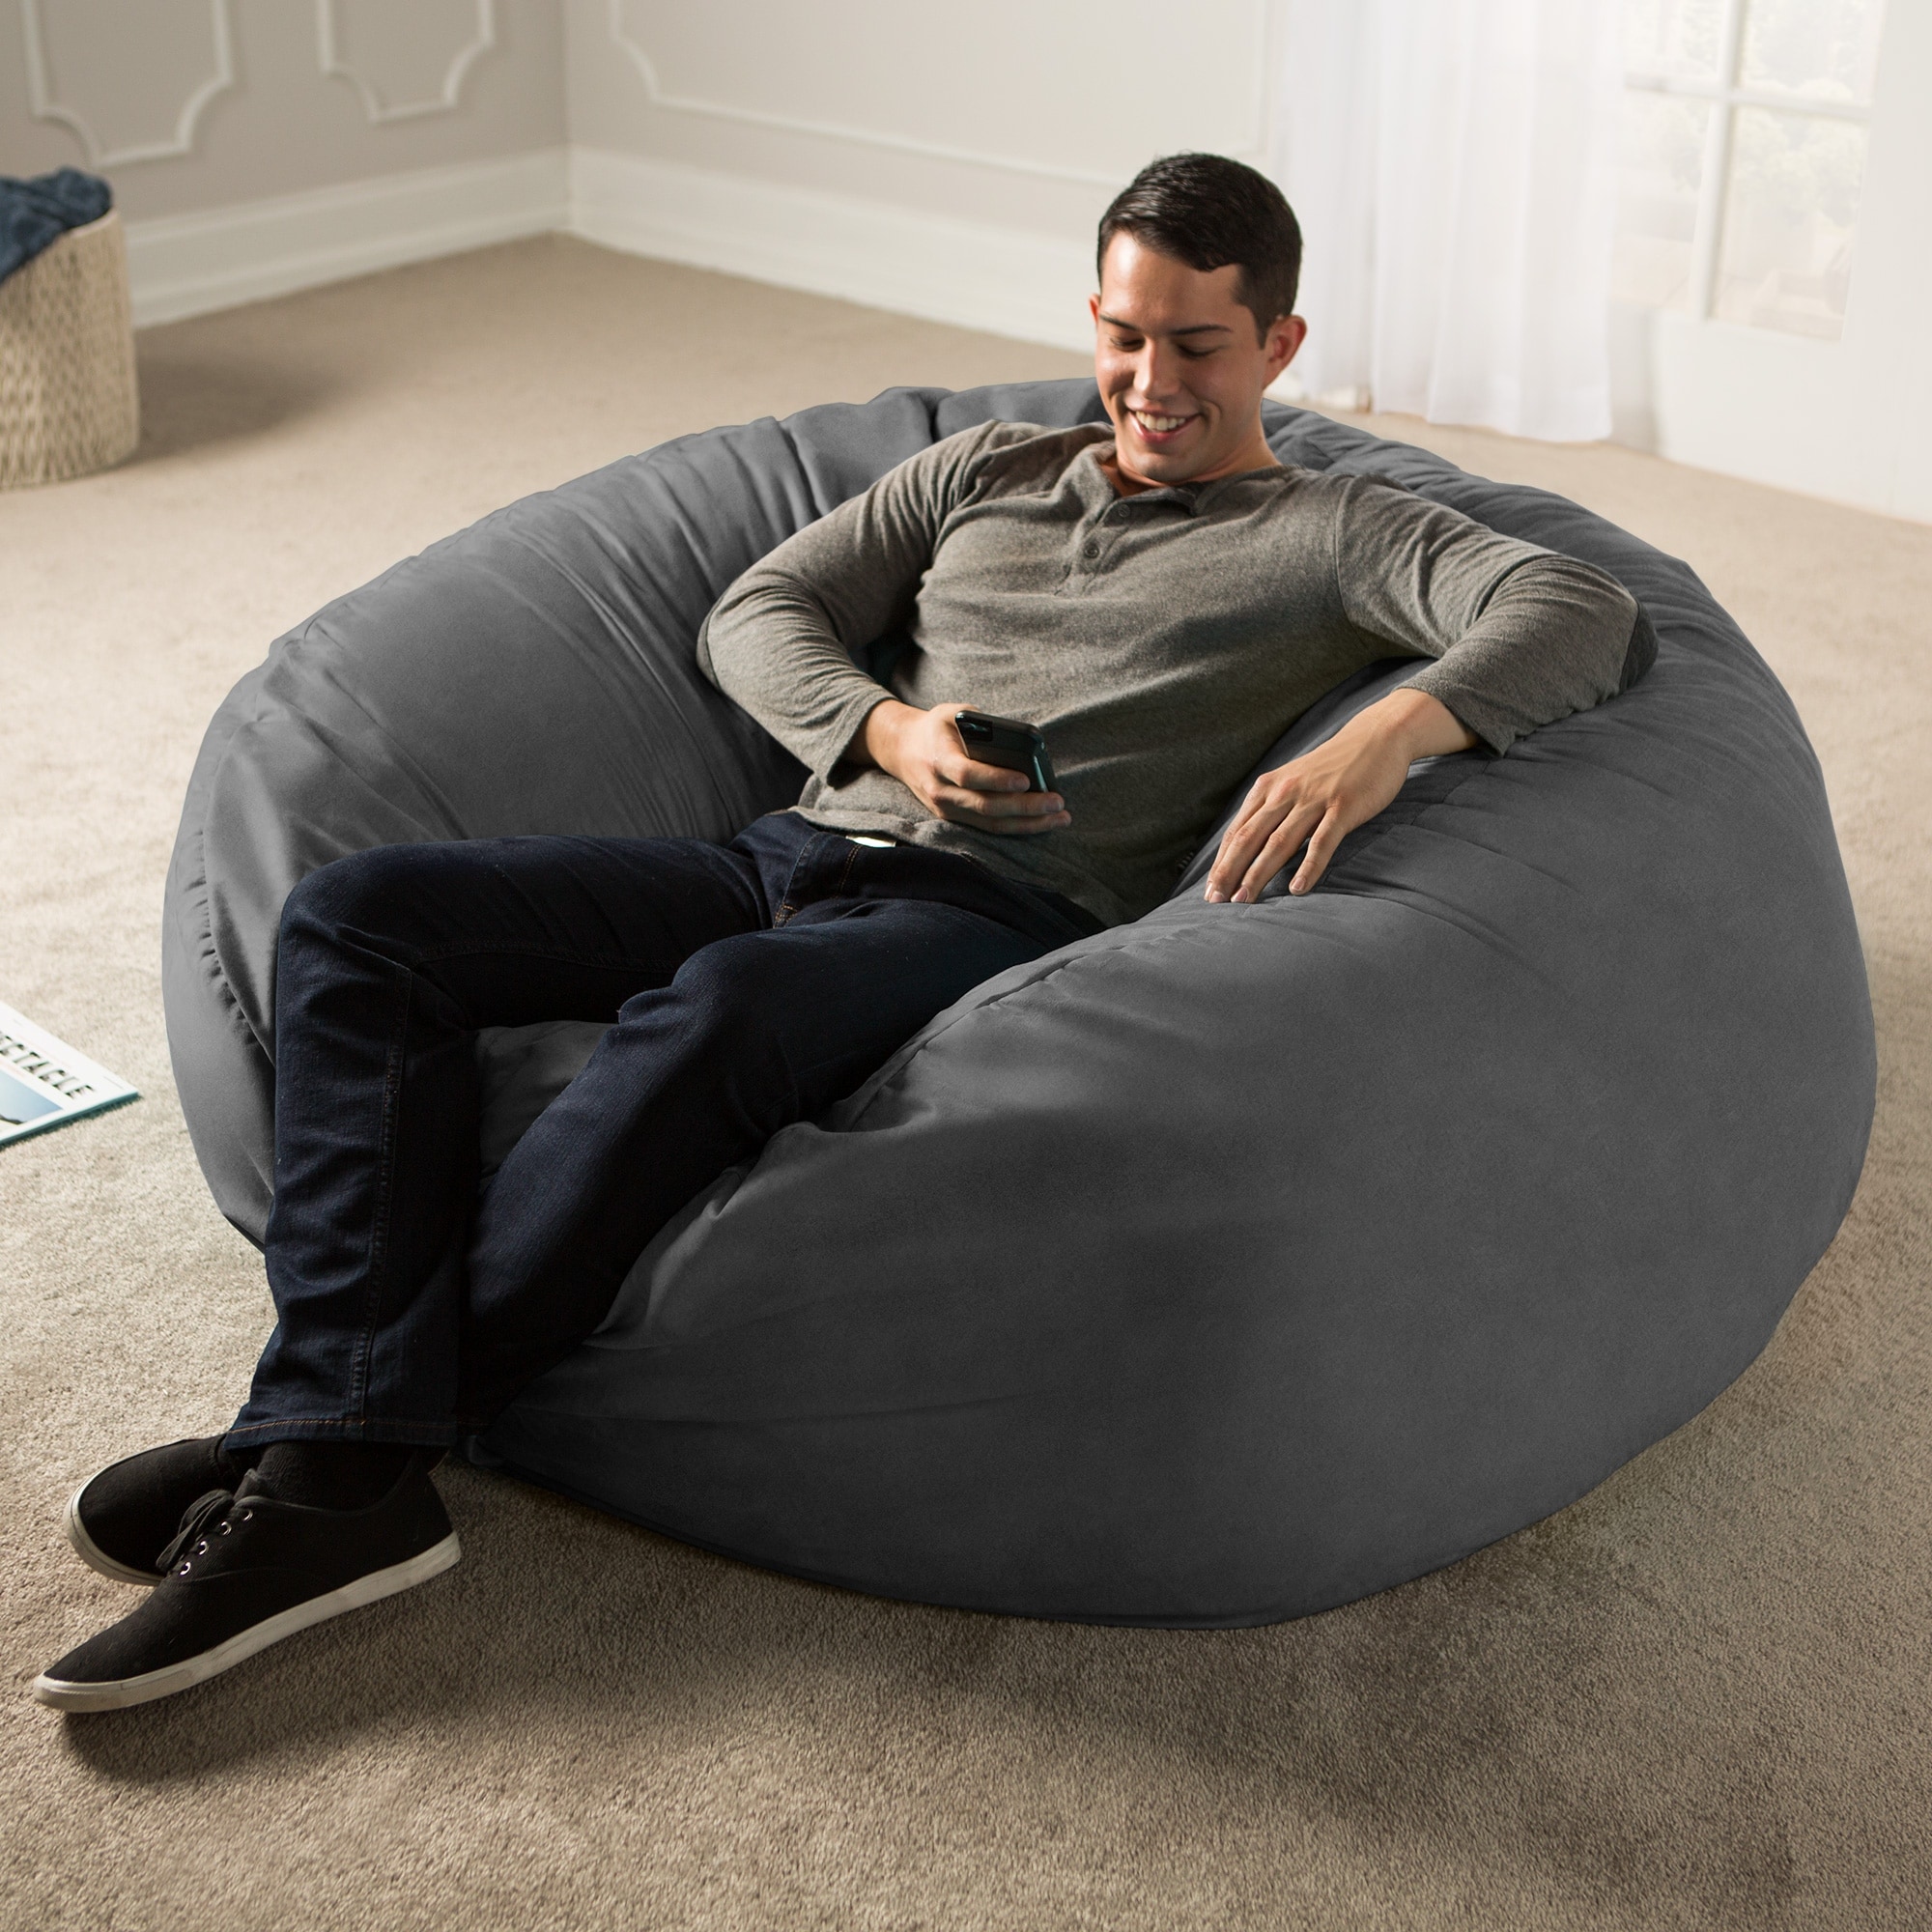 https://ak1.ostkcdn.com/images/products/is/images/direct/af3ed9fa4924ed342db50a8a2ea660f44b188ae1/Jaxx-5-ft.-Giant-Bean-Bag-Chair.jpg